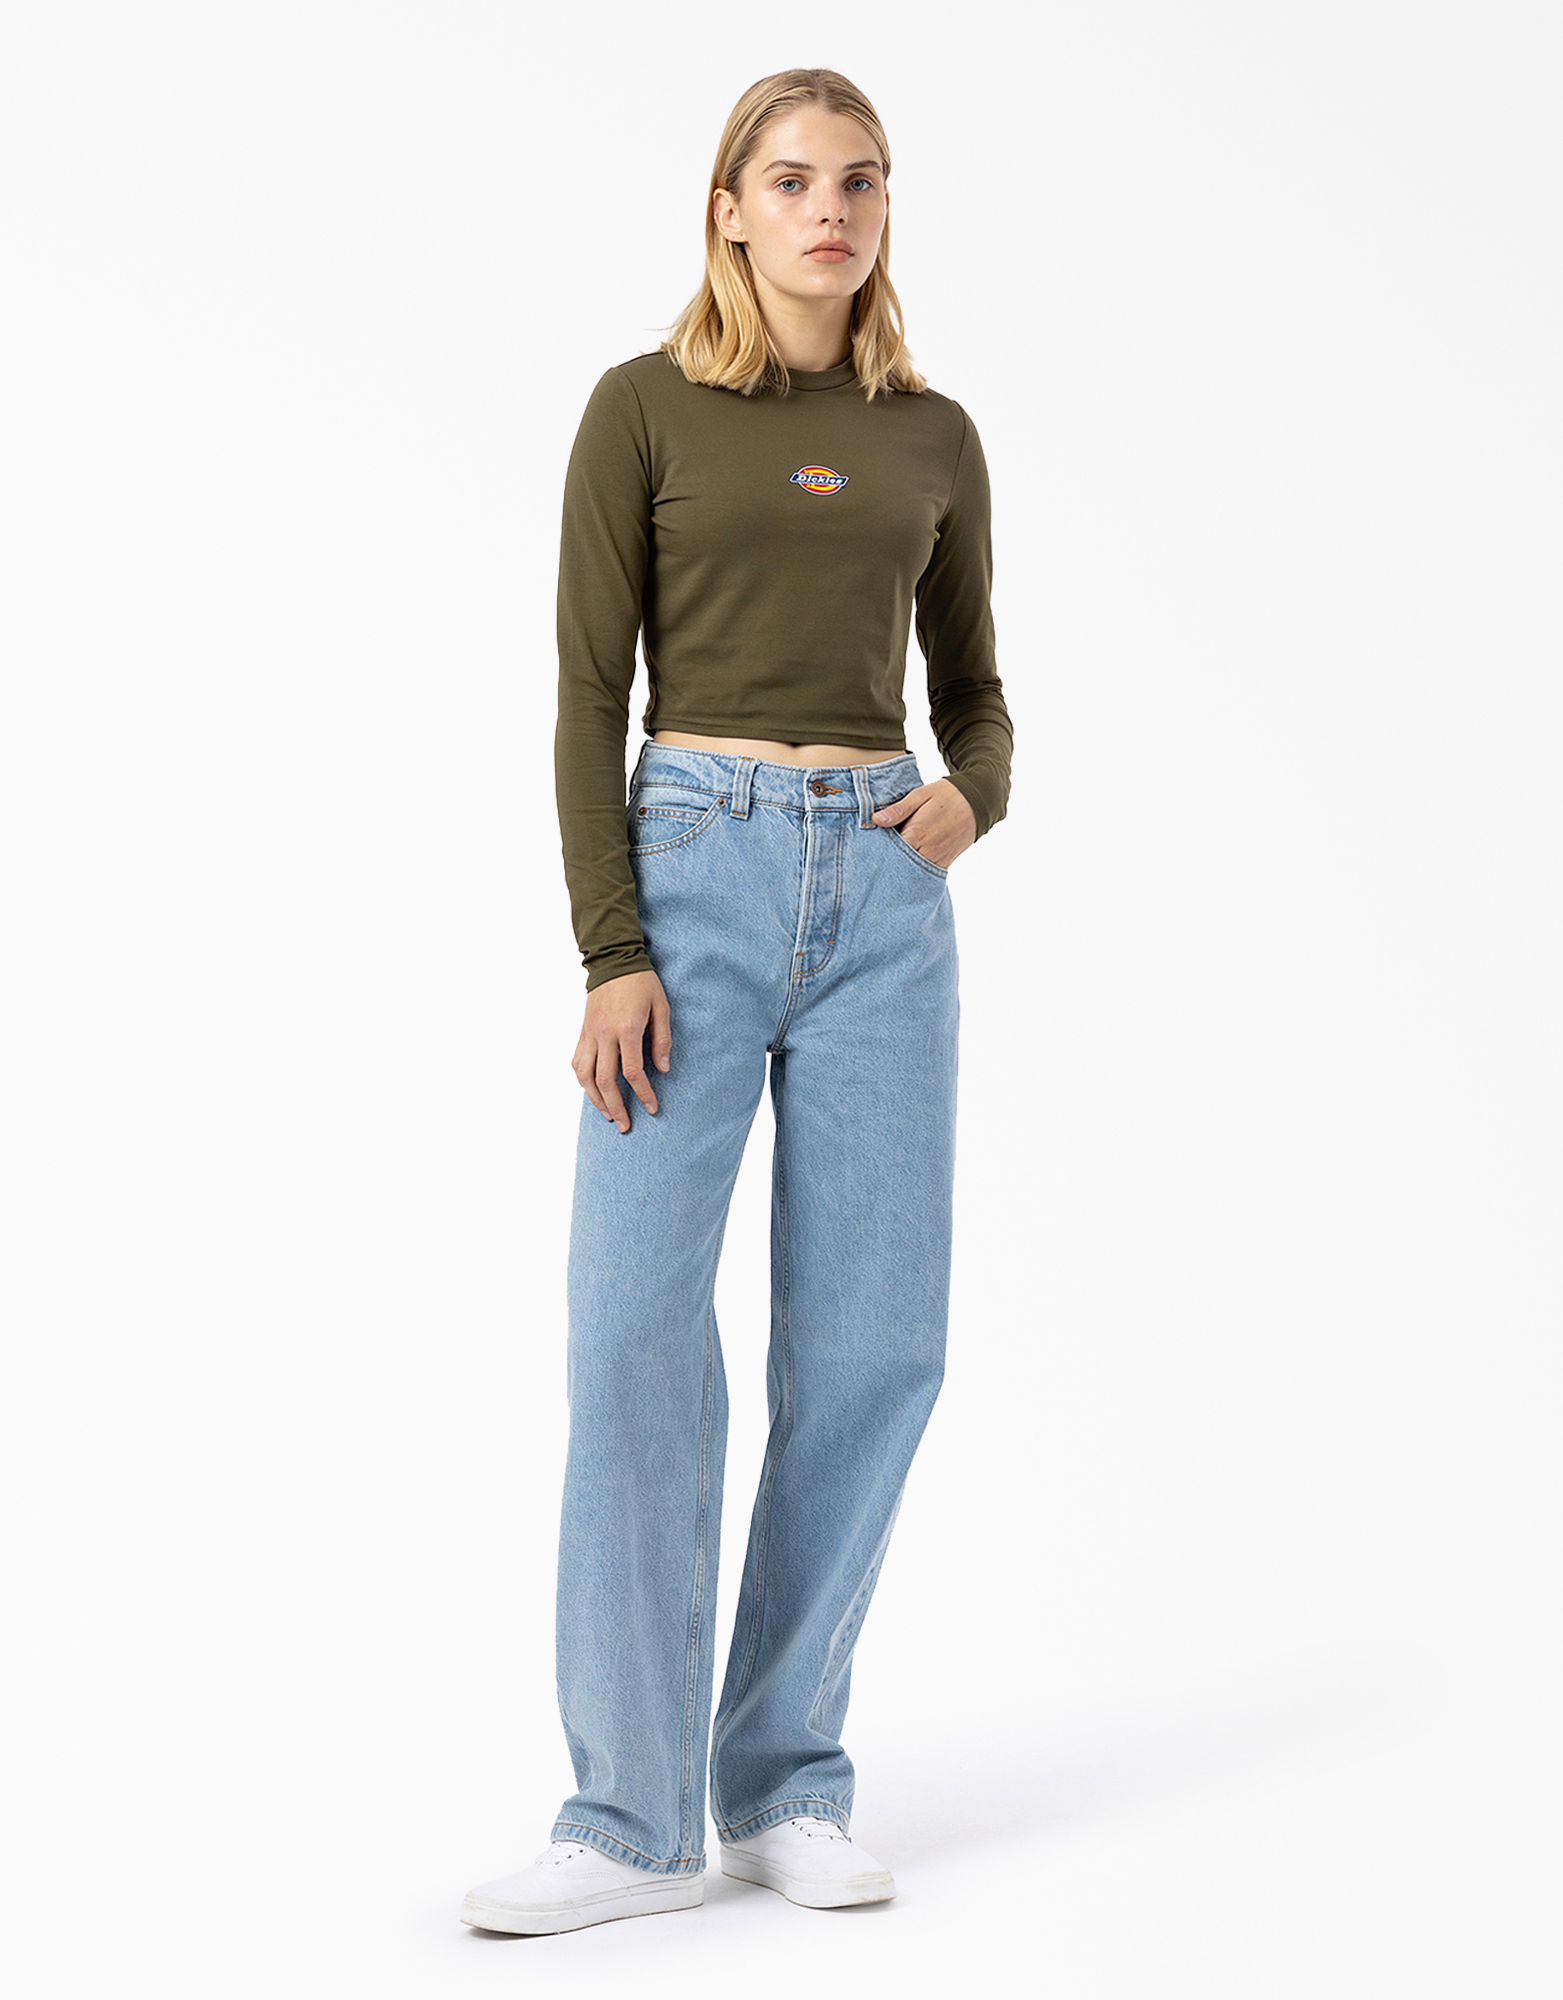 Women's Maple Valley Cropped Long Sleeve T-Shirt